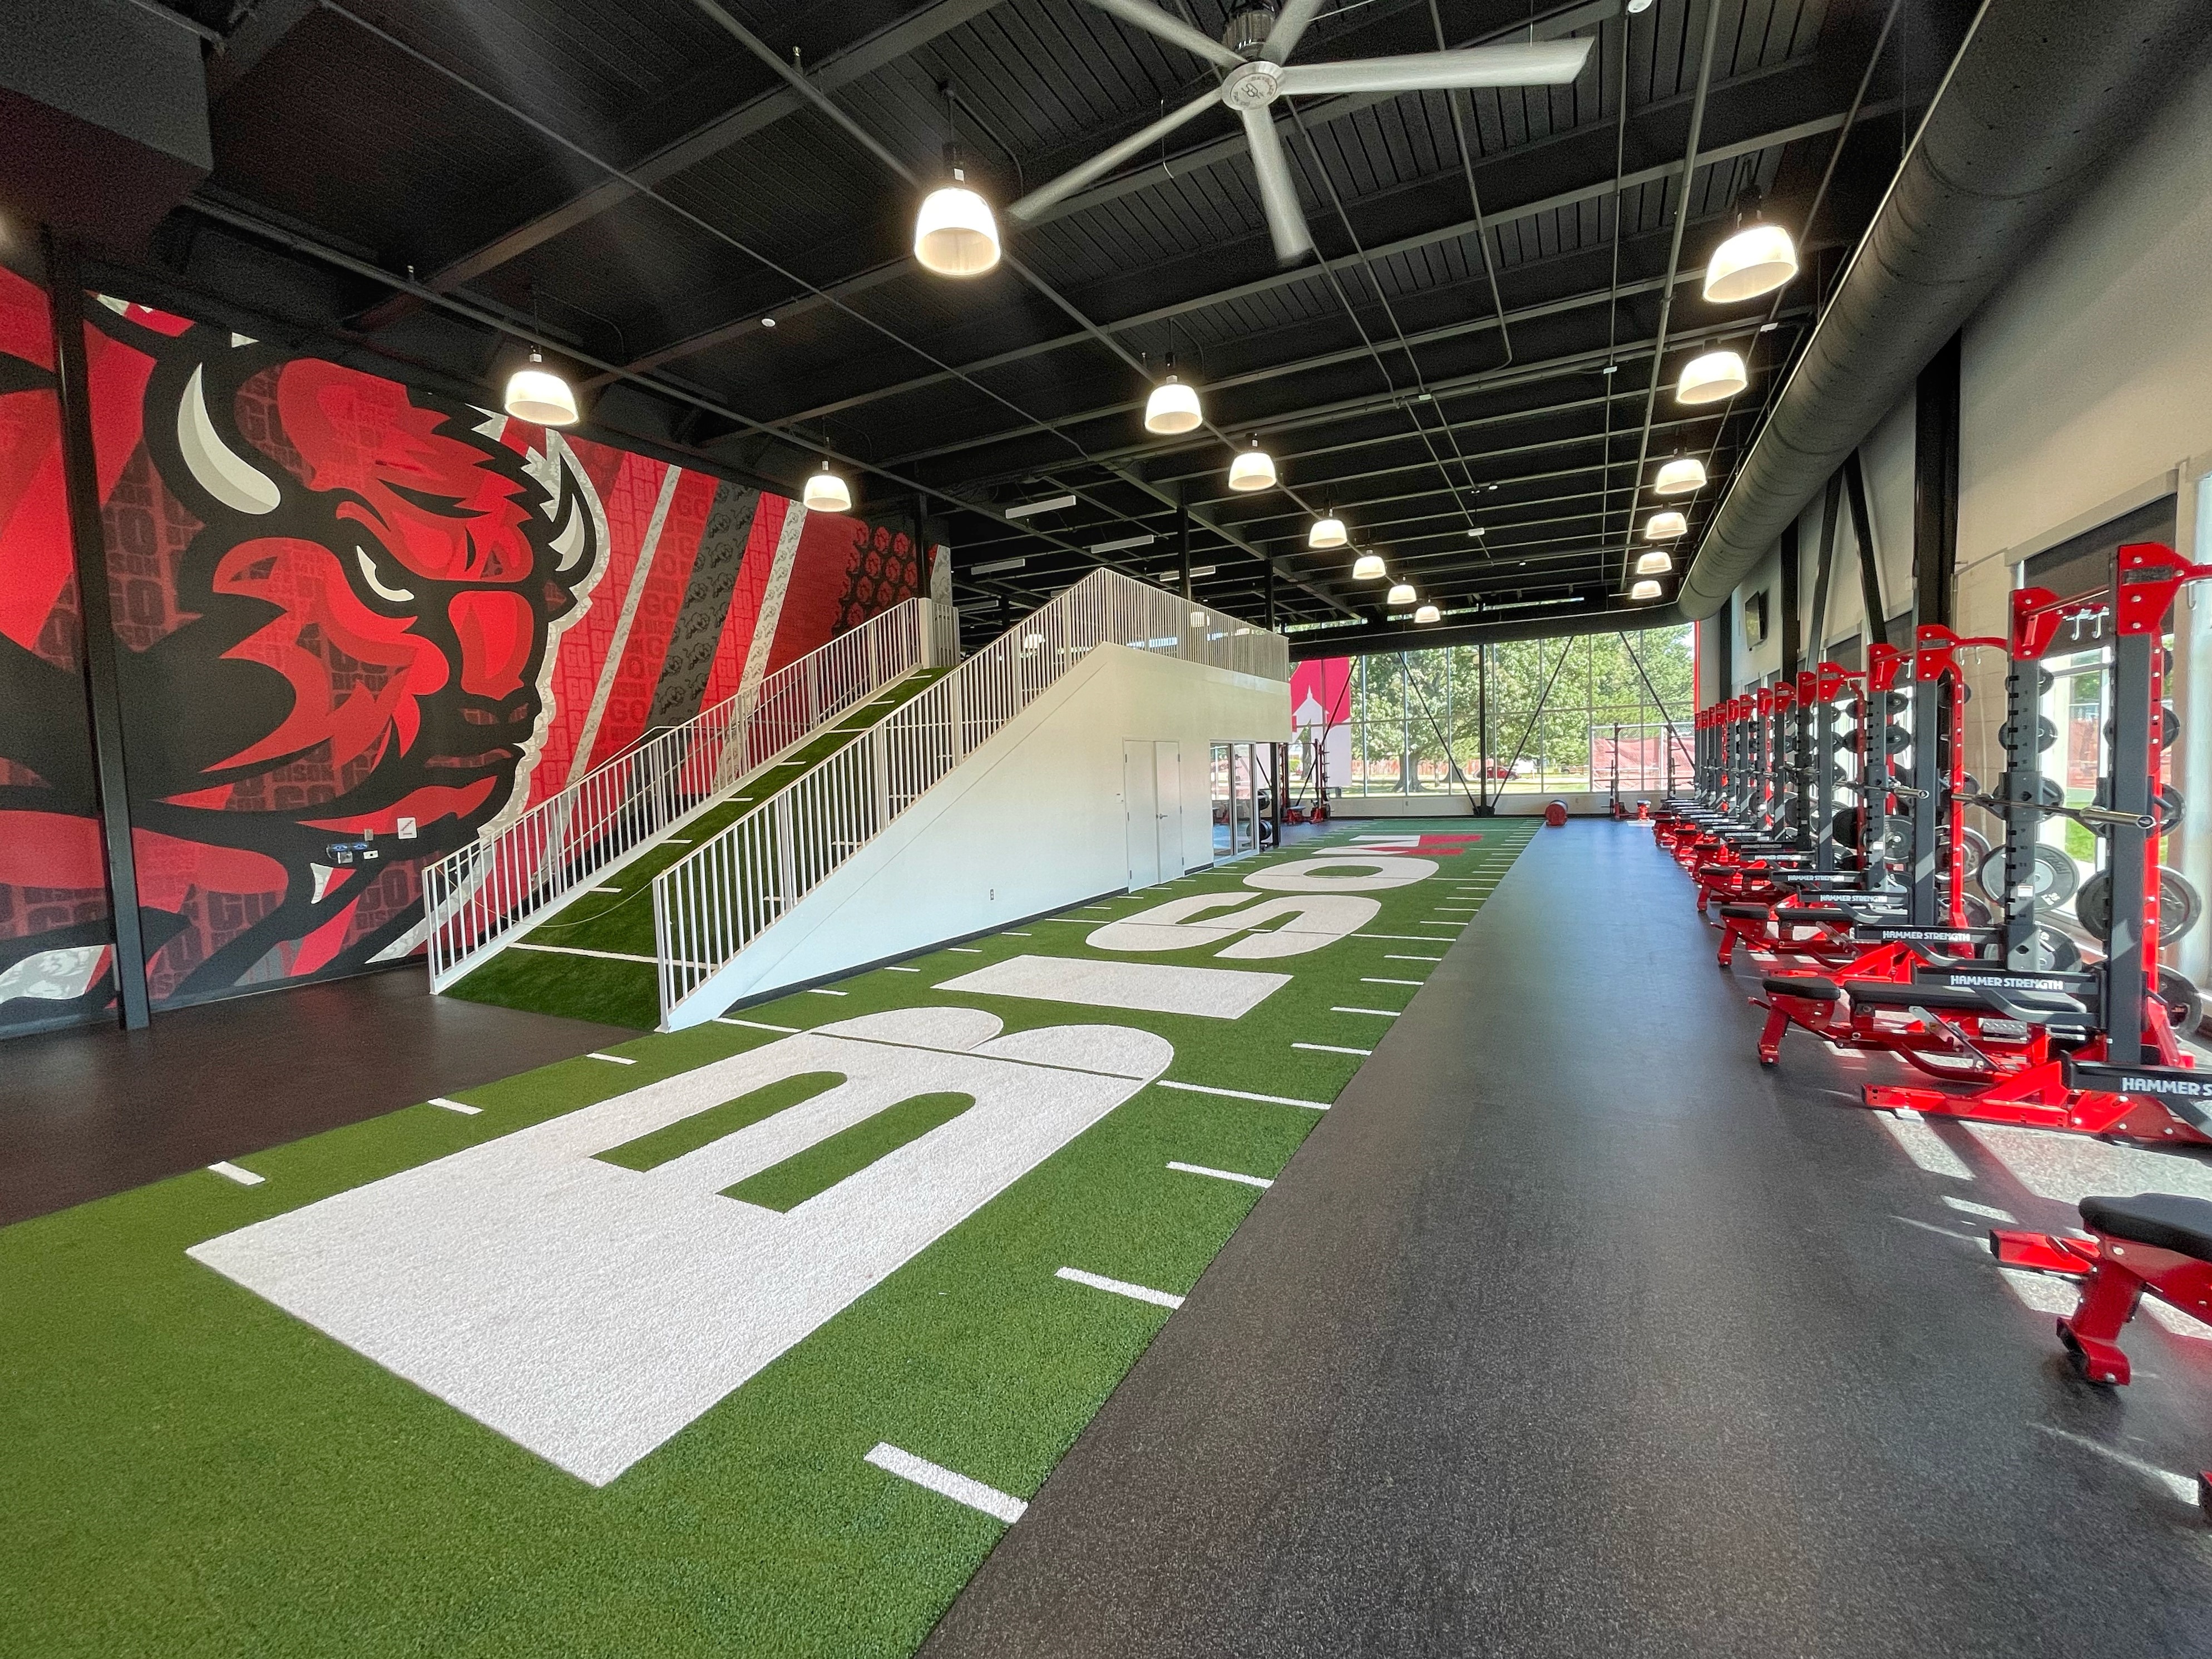 PHOTOS: Check out Shawnee Mission North's new workout facility